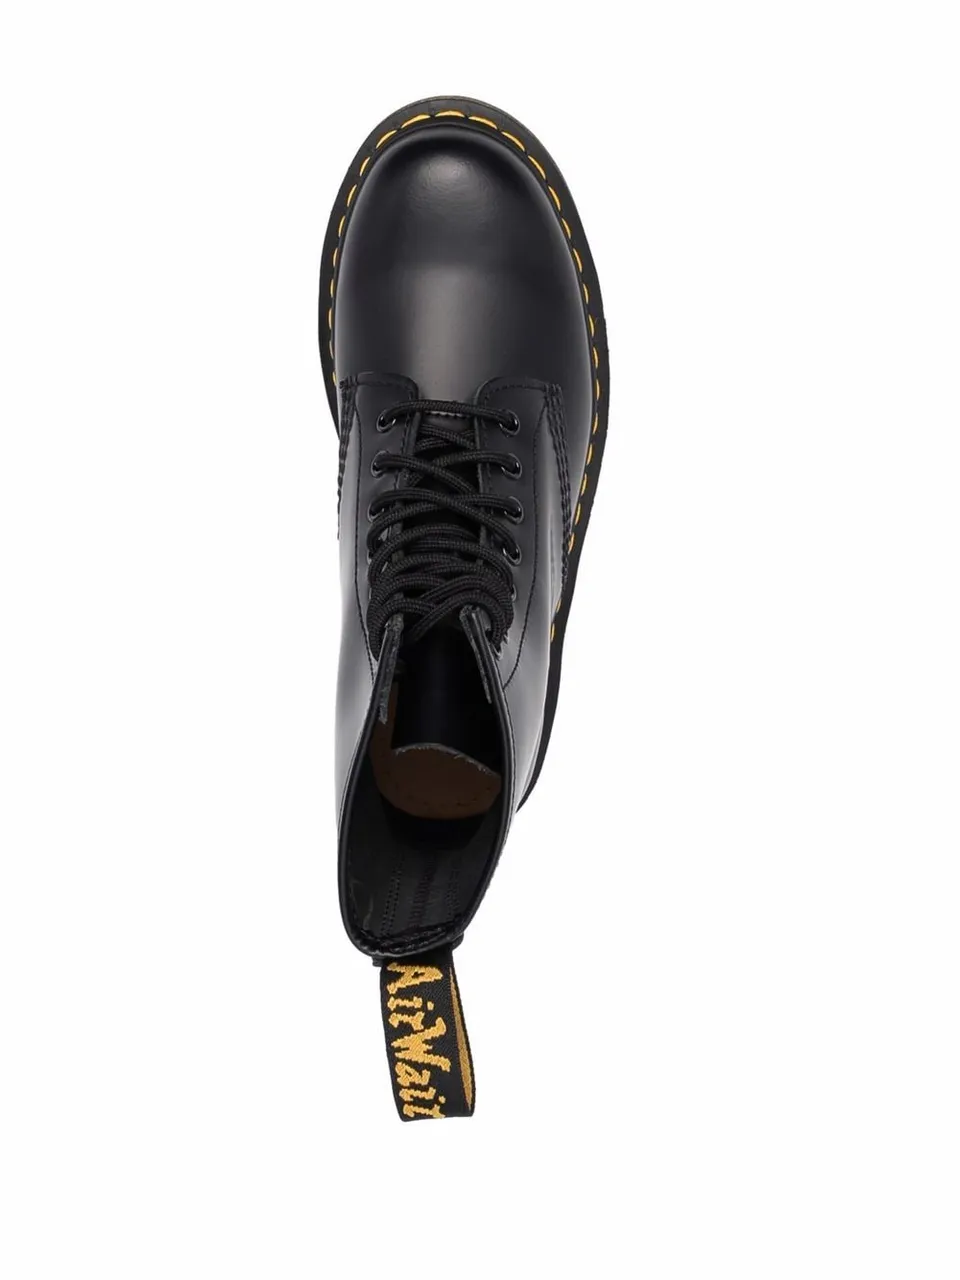 Dr. Martens 1460 smooth-leather boots - Black